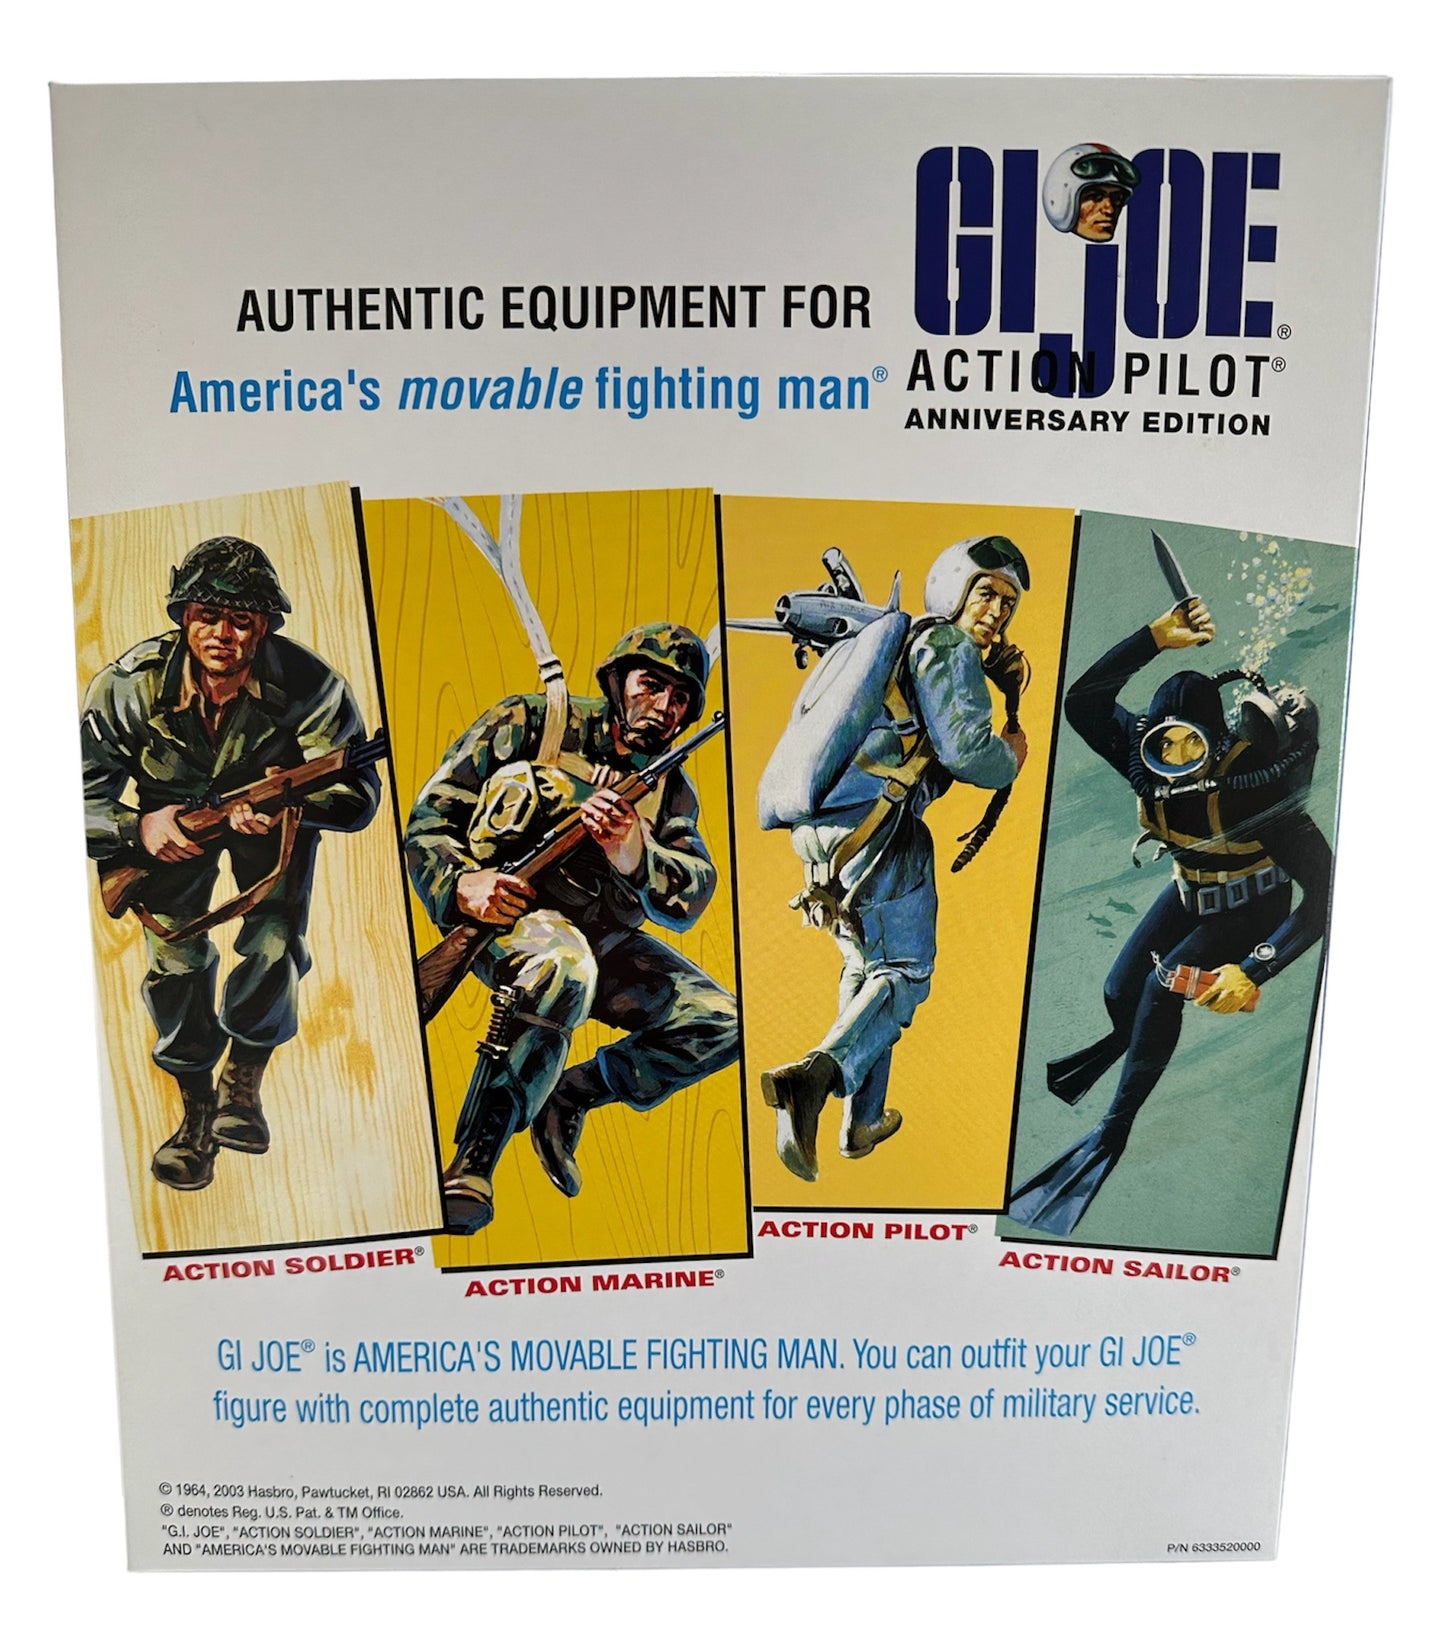 Vintage GI Action Man Joe Pilot 40th Anniversary Edition - America's Movable Fighting Man - Crash Crew Uniform Outfit And Accessories - Brand New Factory Sealed Shop Stock Room Find